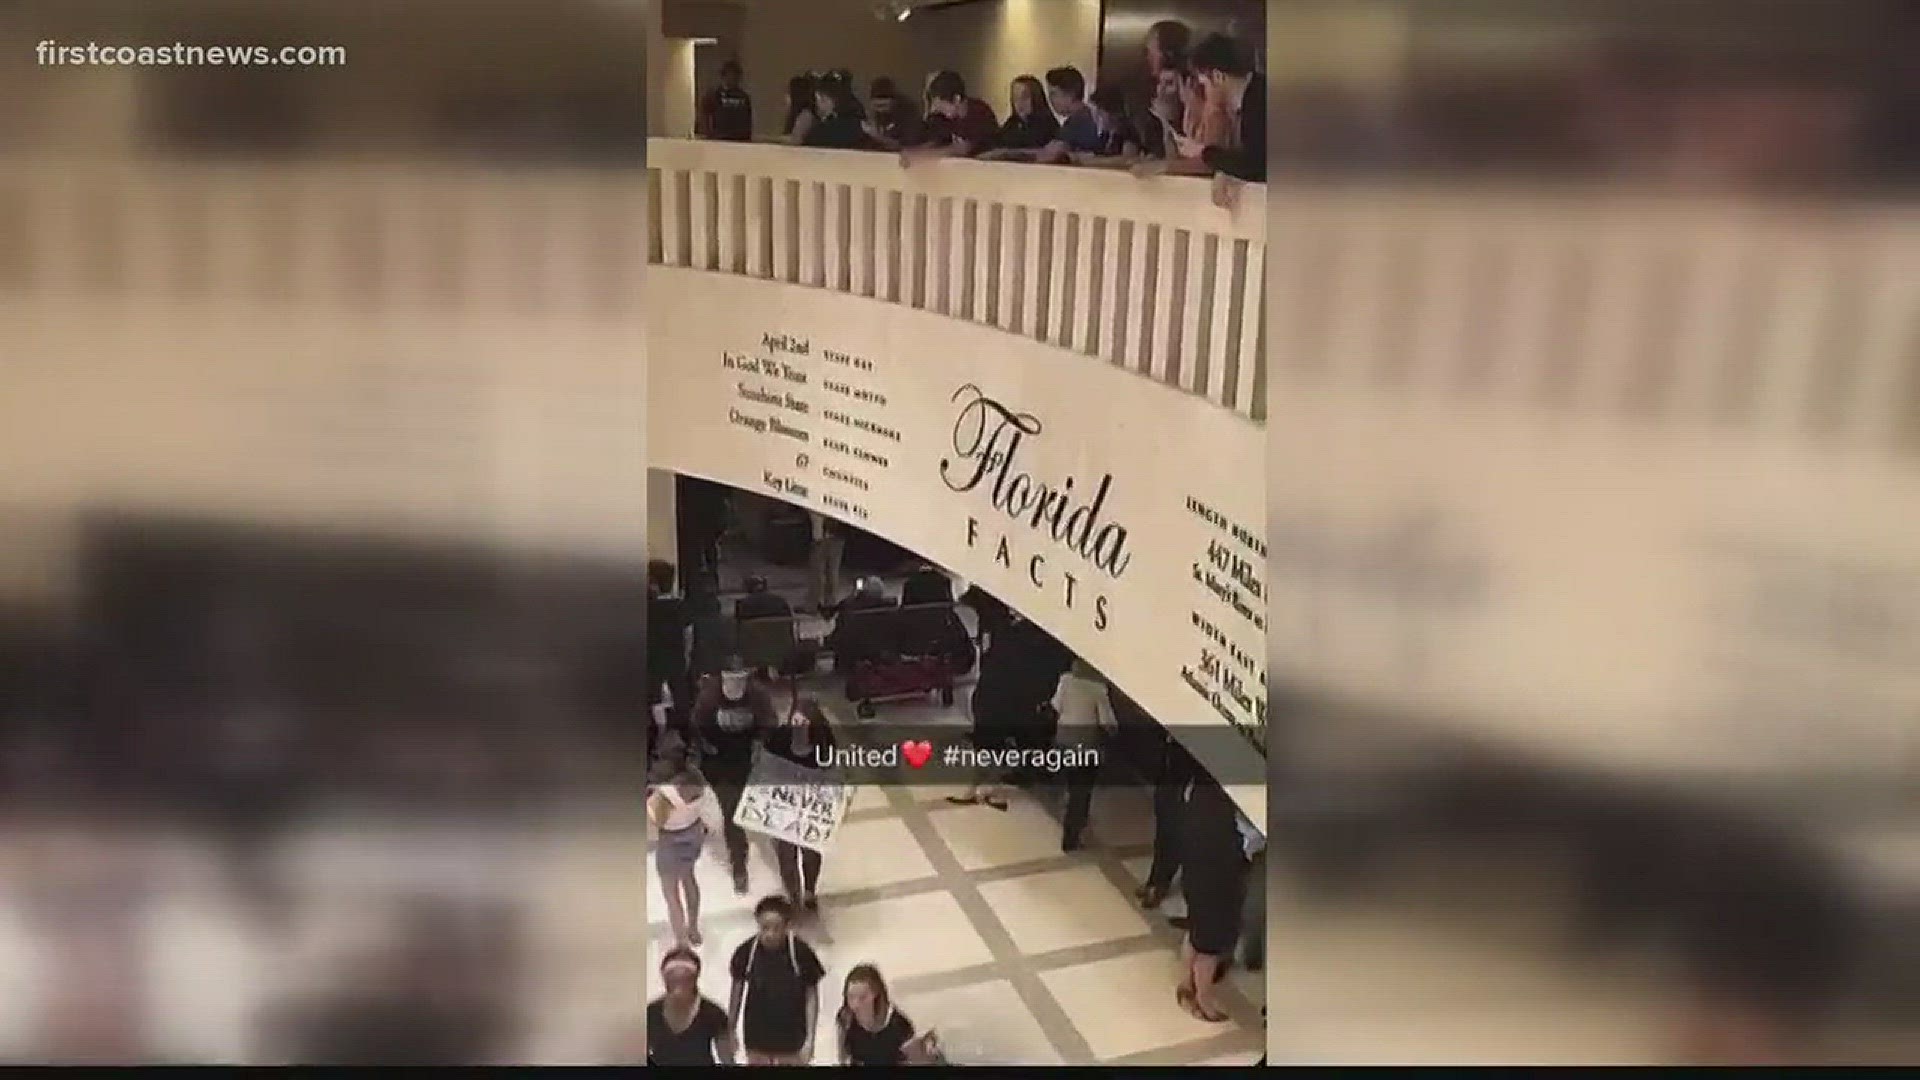 Students marched in Tallahassee, recorded the protests and posted them to Snapchat.